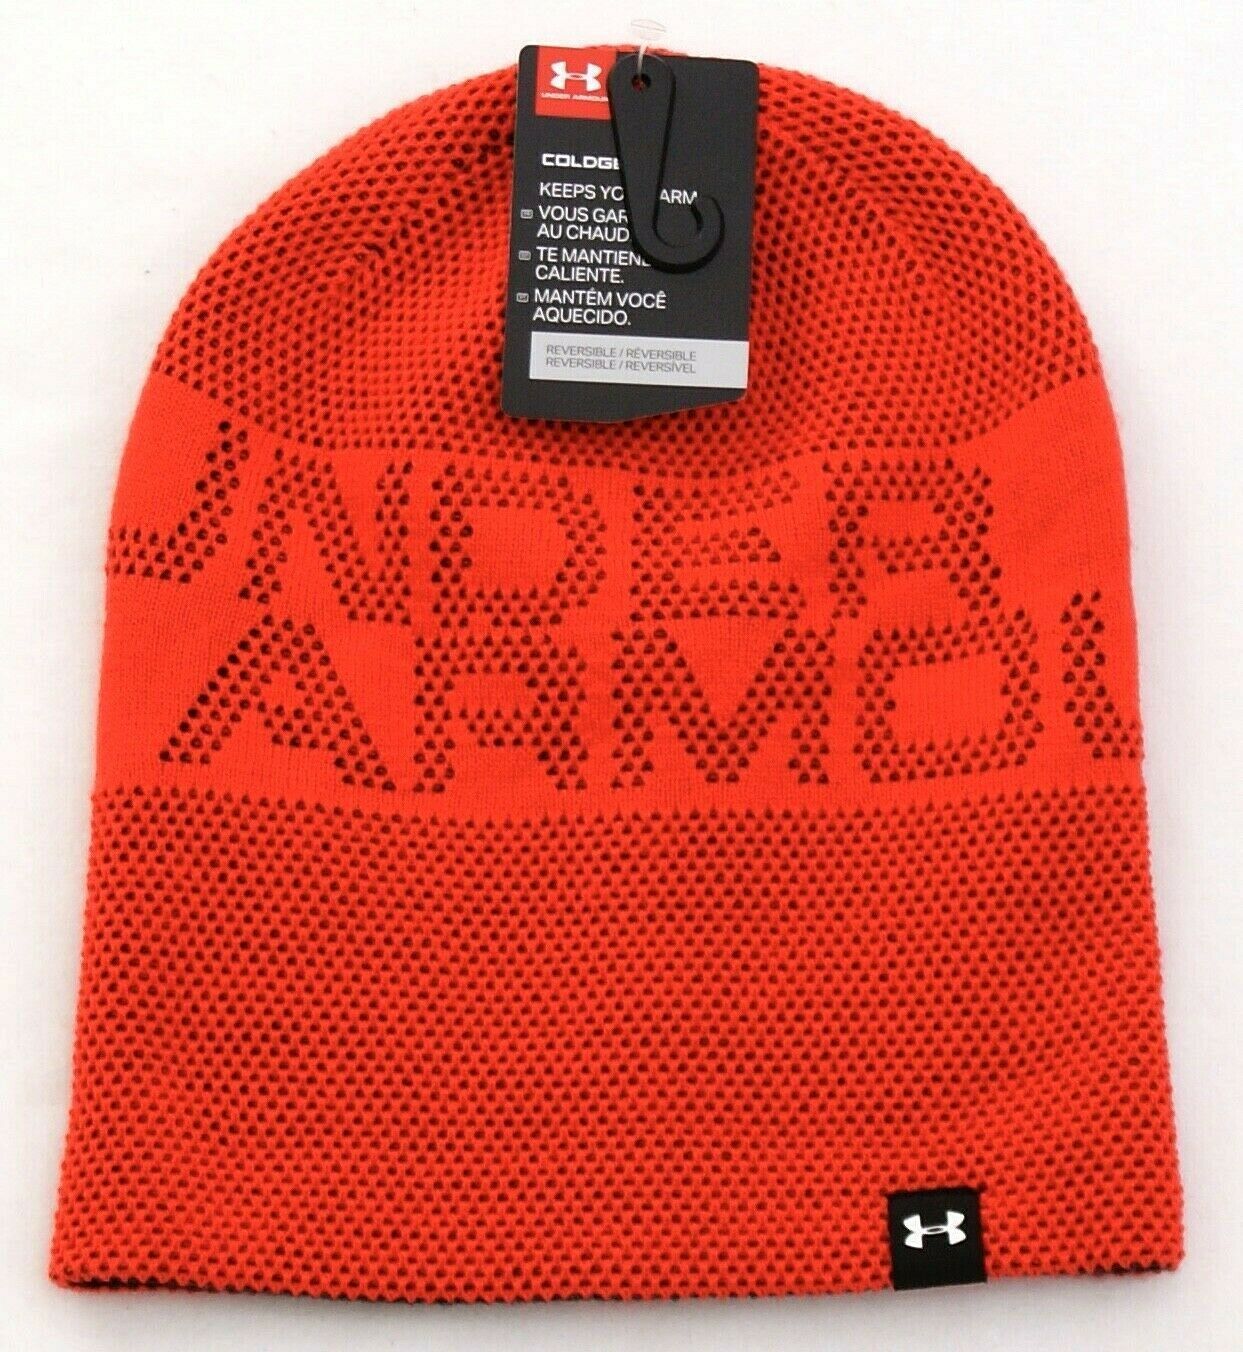 Under Armour Reversible Red & Orange 4-in-1 Graphic Knit Beanie 4-6 Years NWT - $22.27